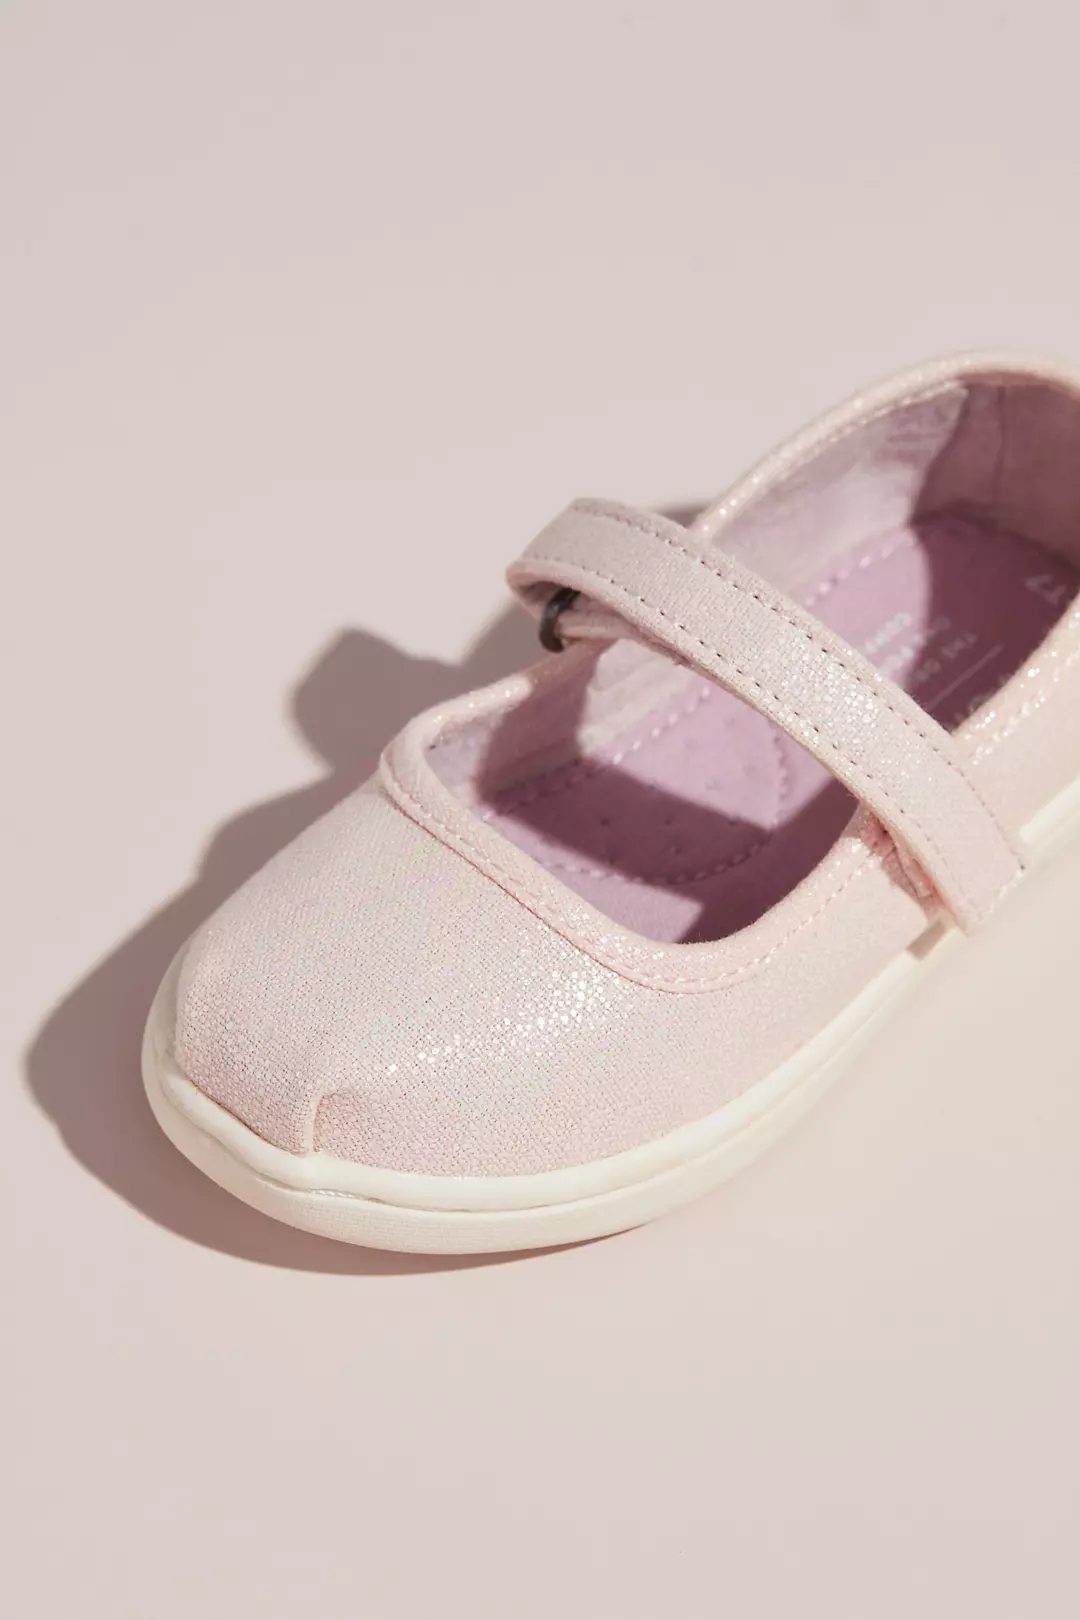 TOMS Girls Pearlized Mary Janes Image 3